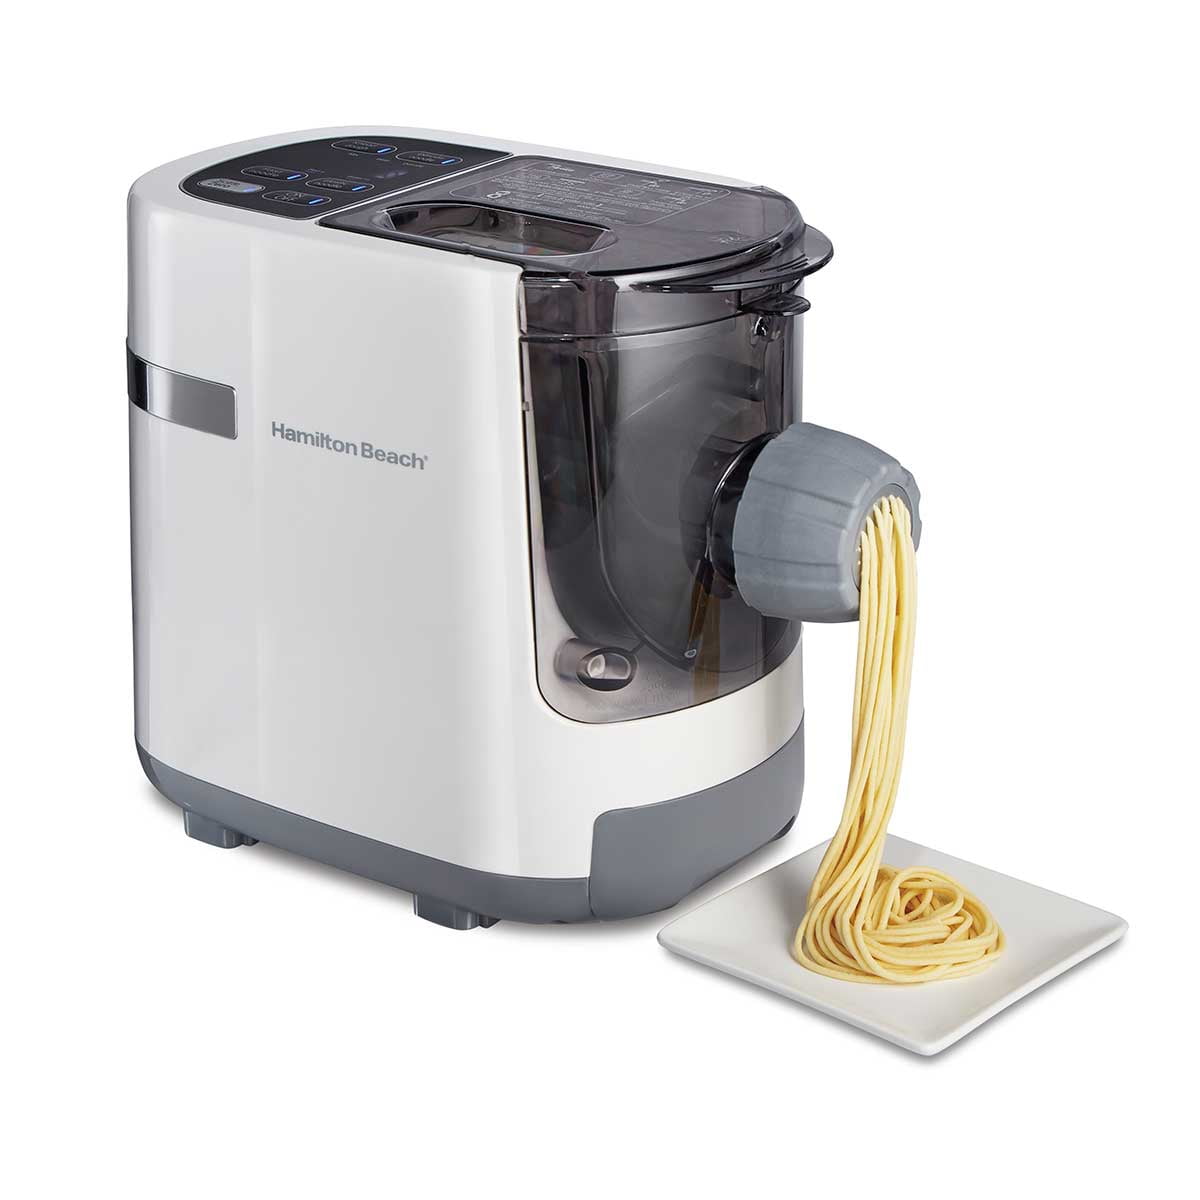 Pasta Machine with Clean Tools Pasta and Noodle Maker Machine GEKER Pasta Maker Automatic Electric Noodle Maker Machine with 6 Different Pasta Shapes Model 